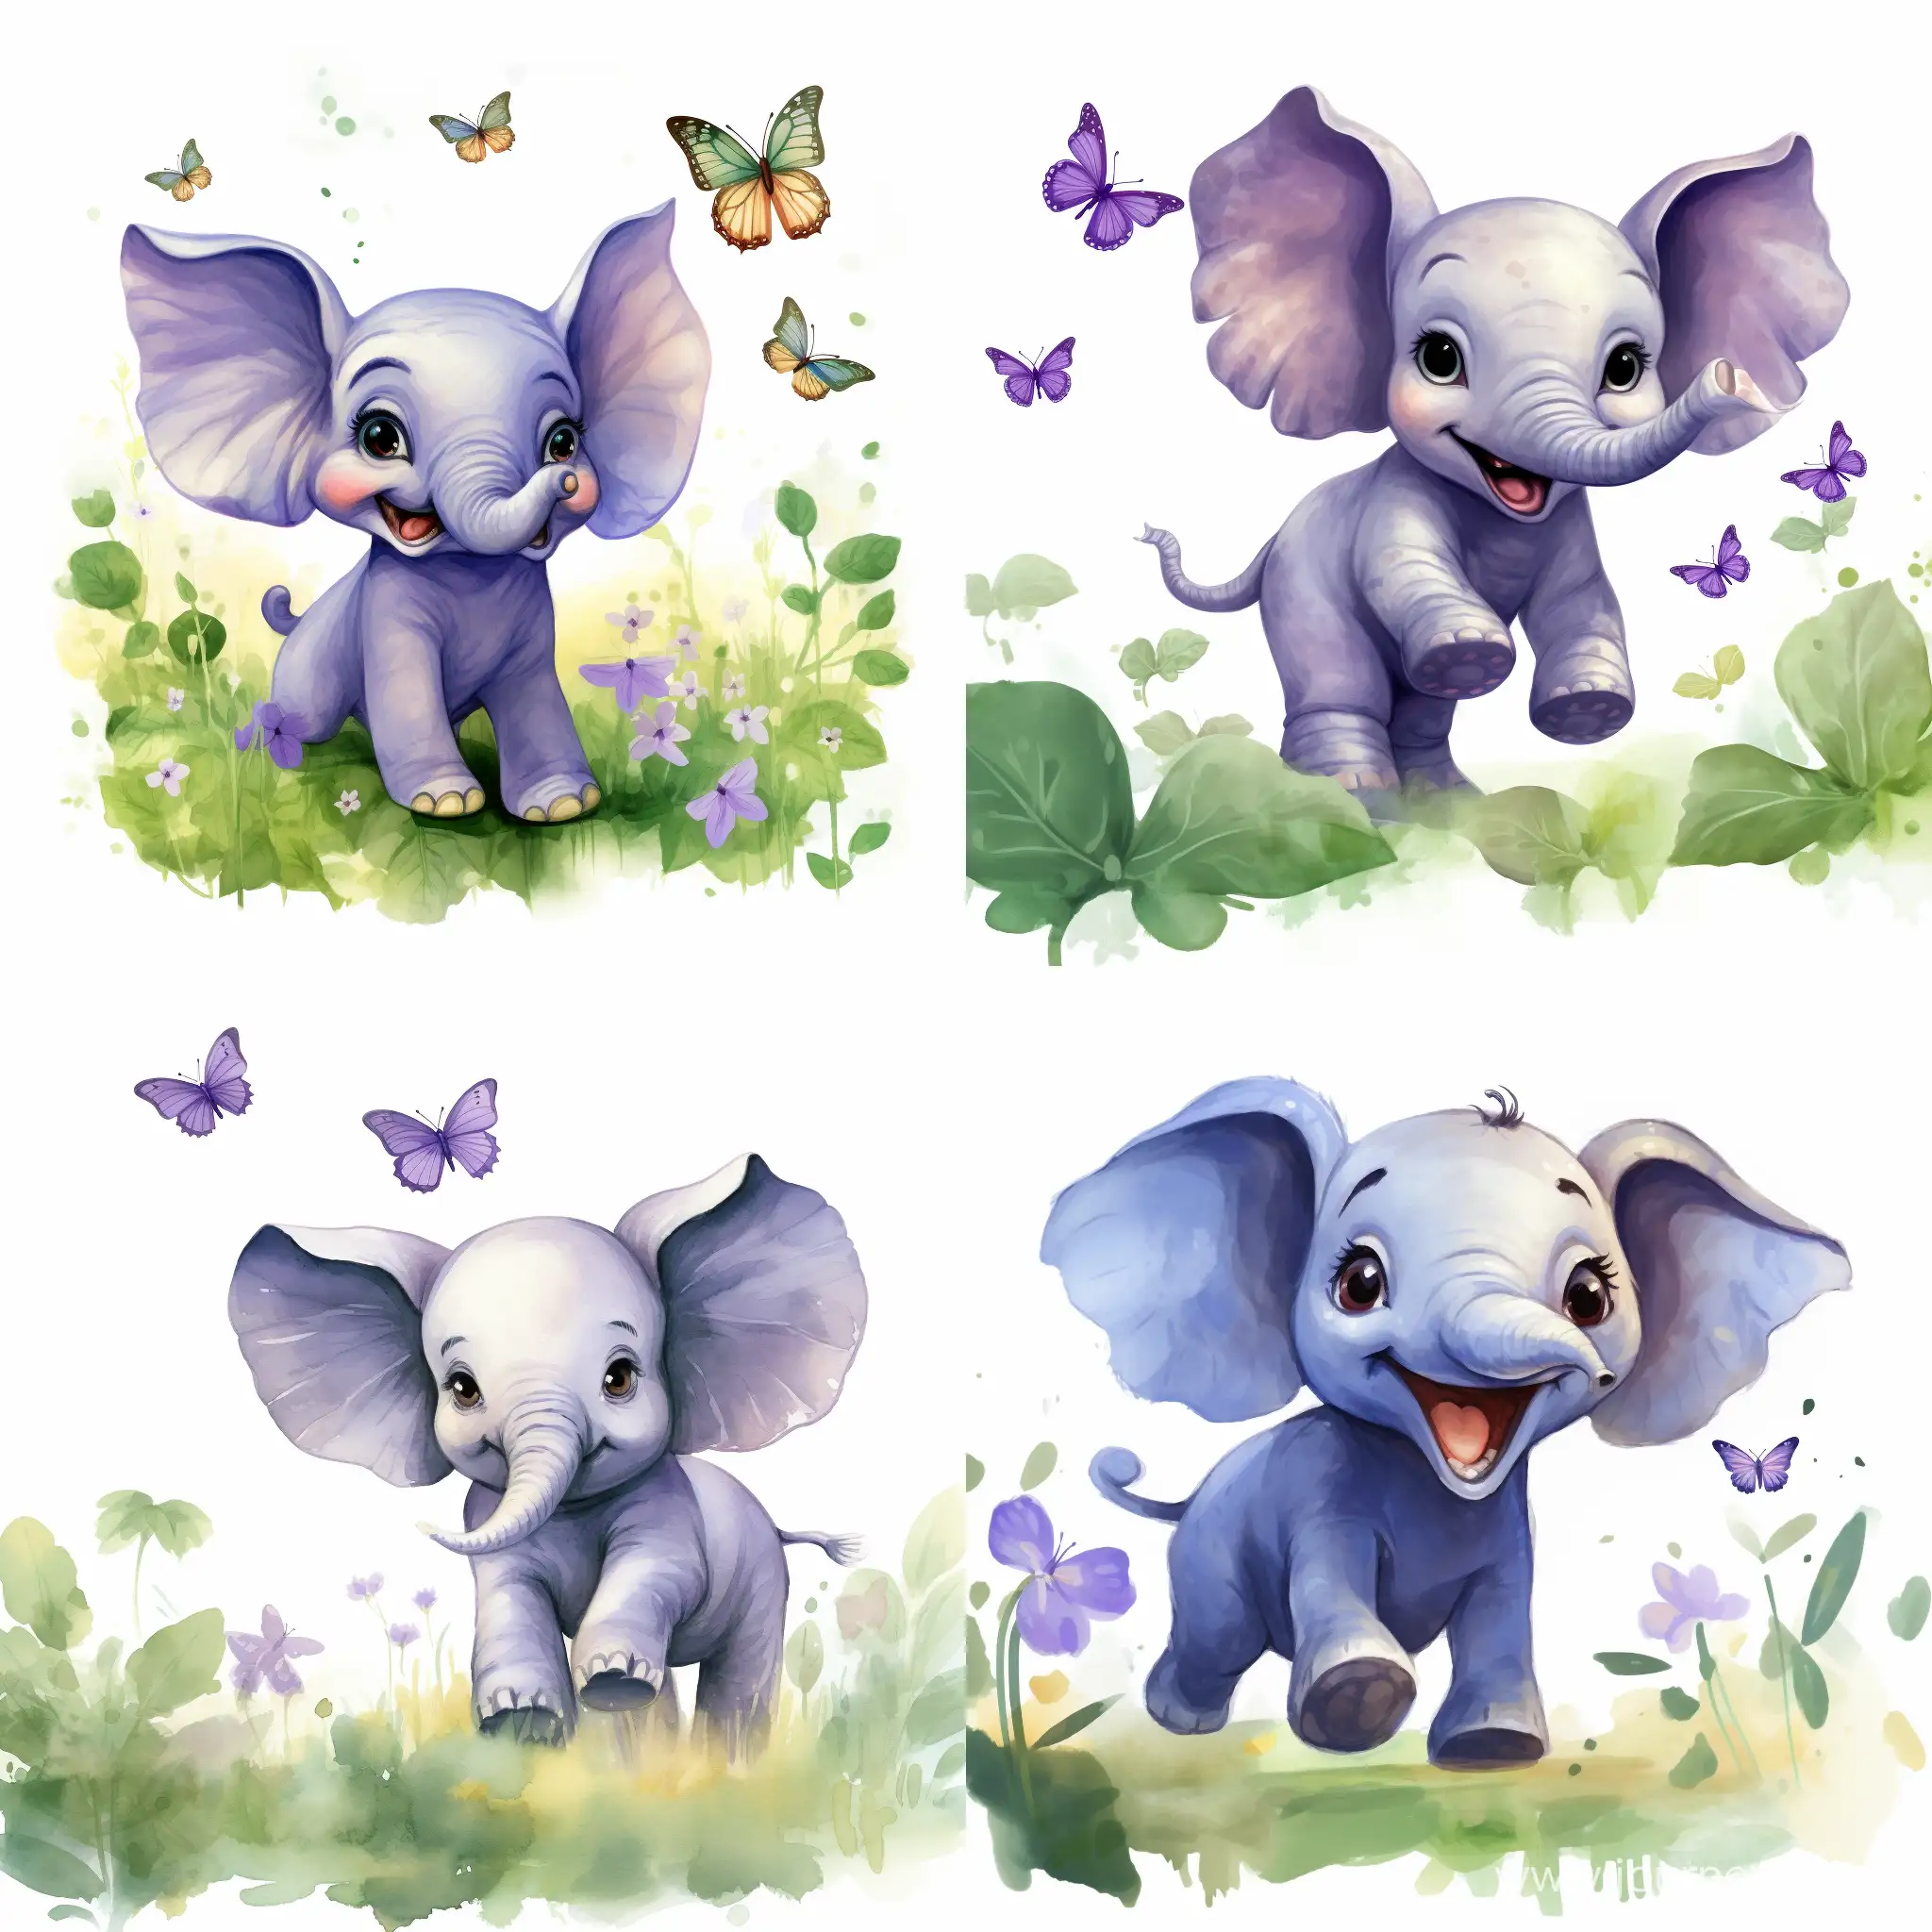 Playful-Baby-Elephant-Chasing-Butterfly-in-Adorable-Watercolor-Cartoon